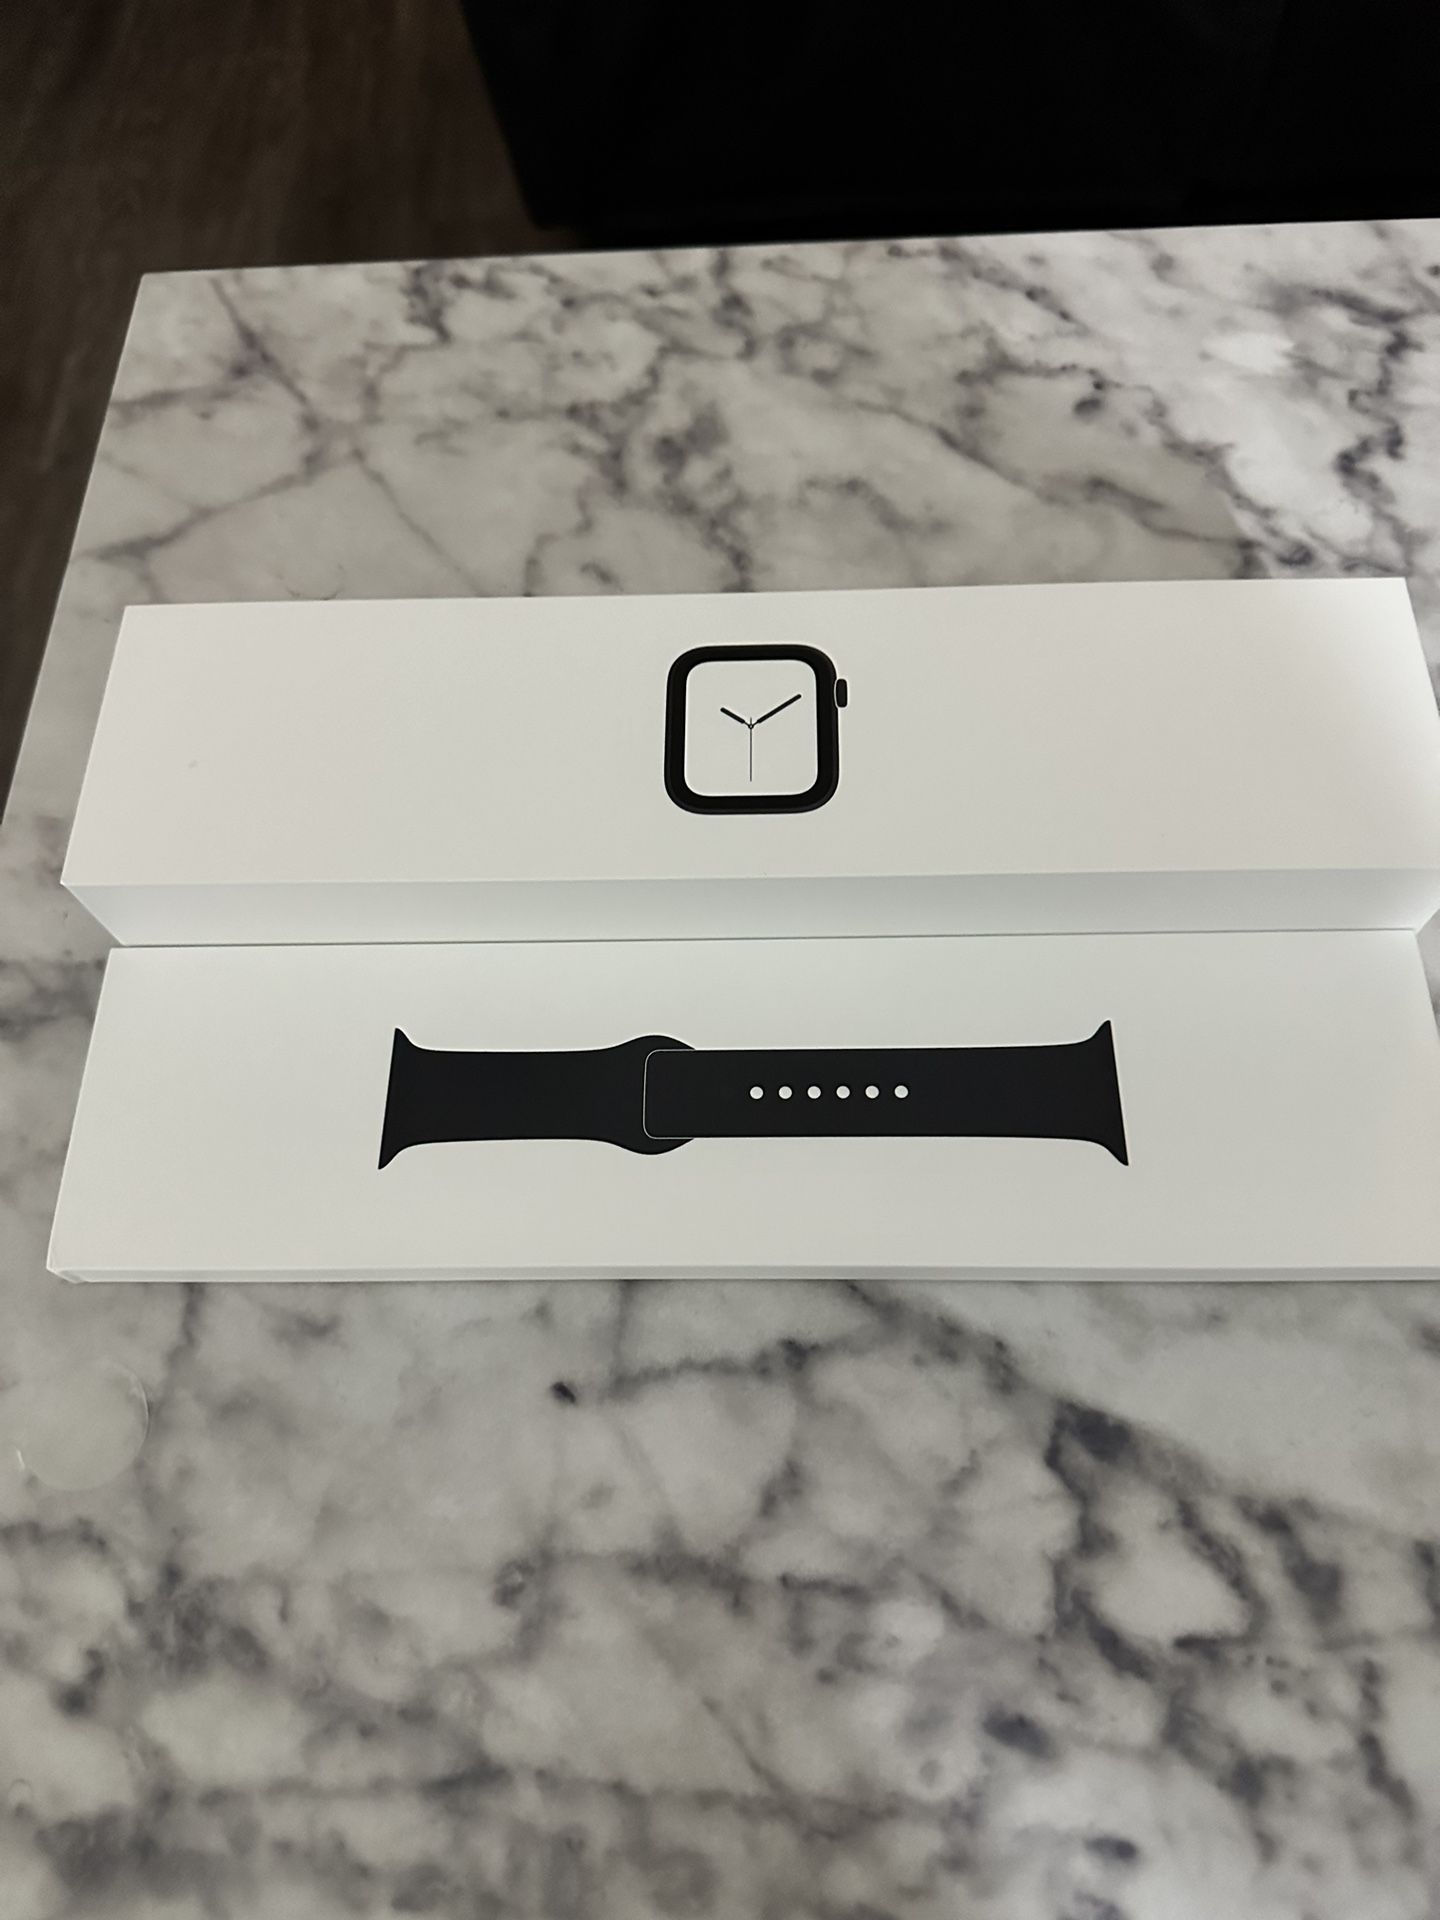 Buy One Get On Free 44mm Space Black Apple Watch Series 4 Stainless Steel (GPS+Cellular ) 